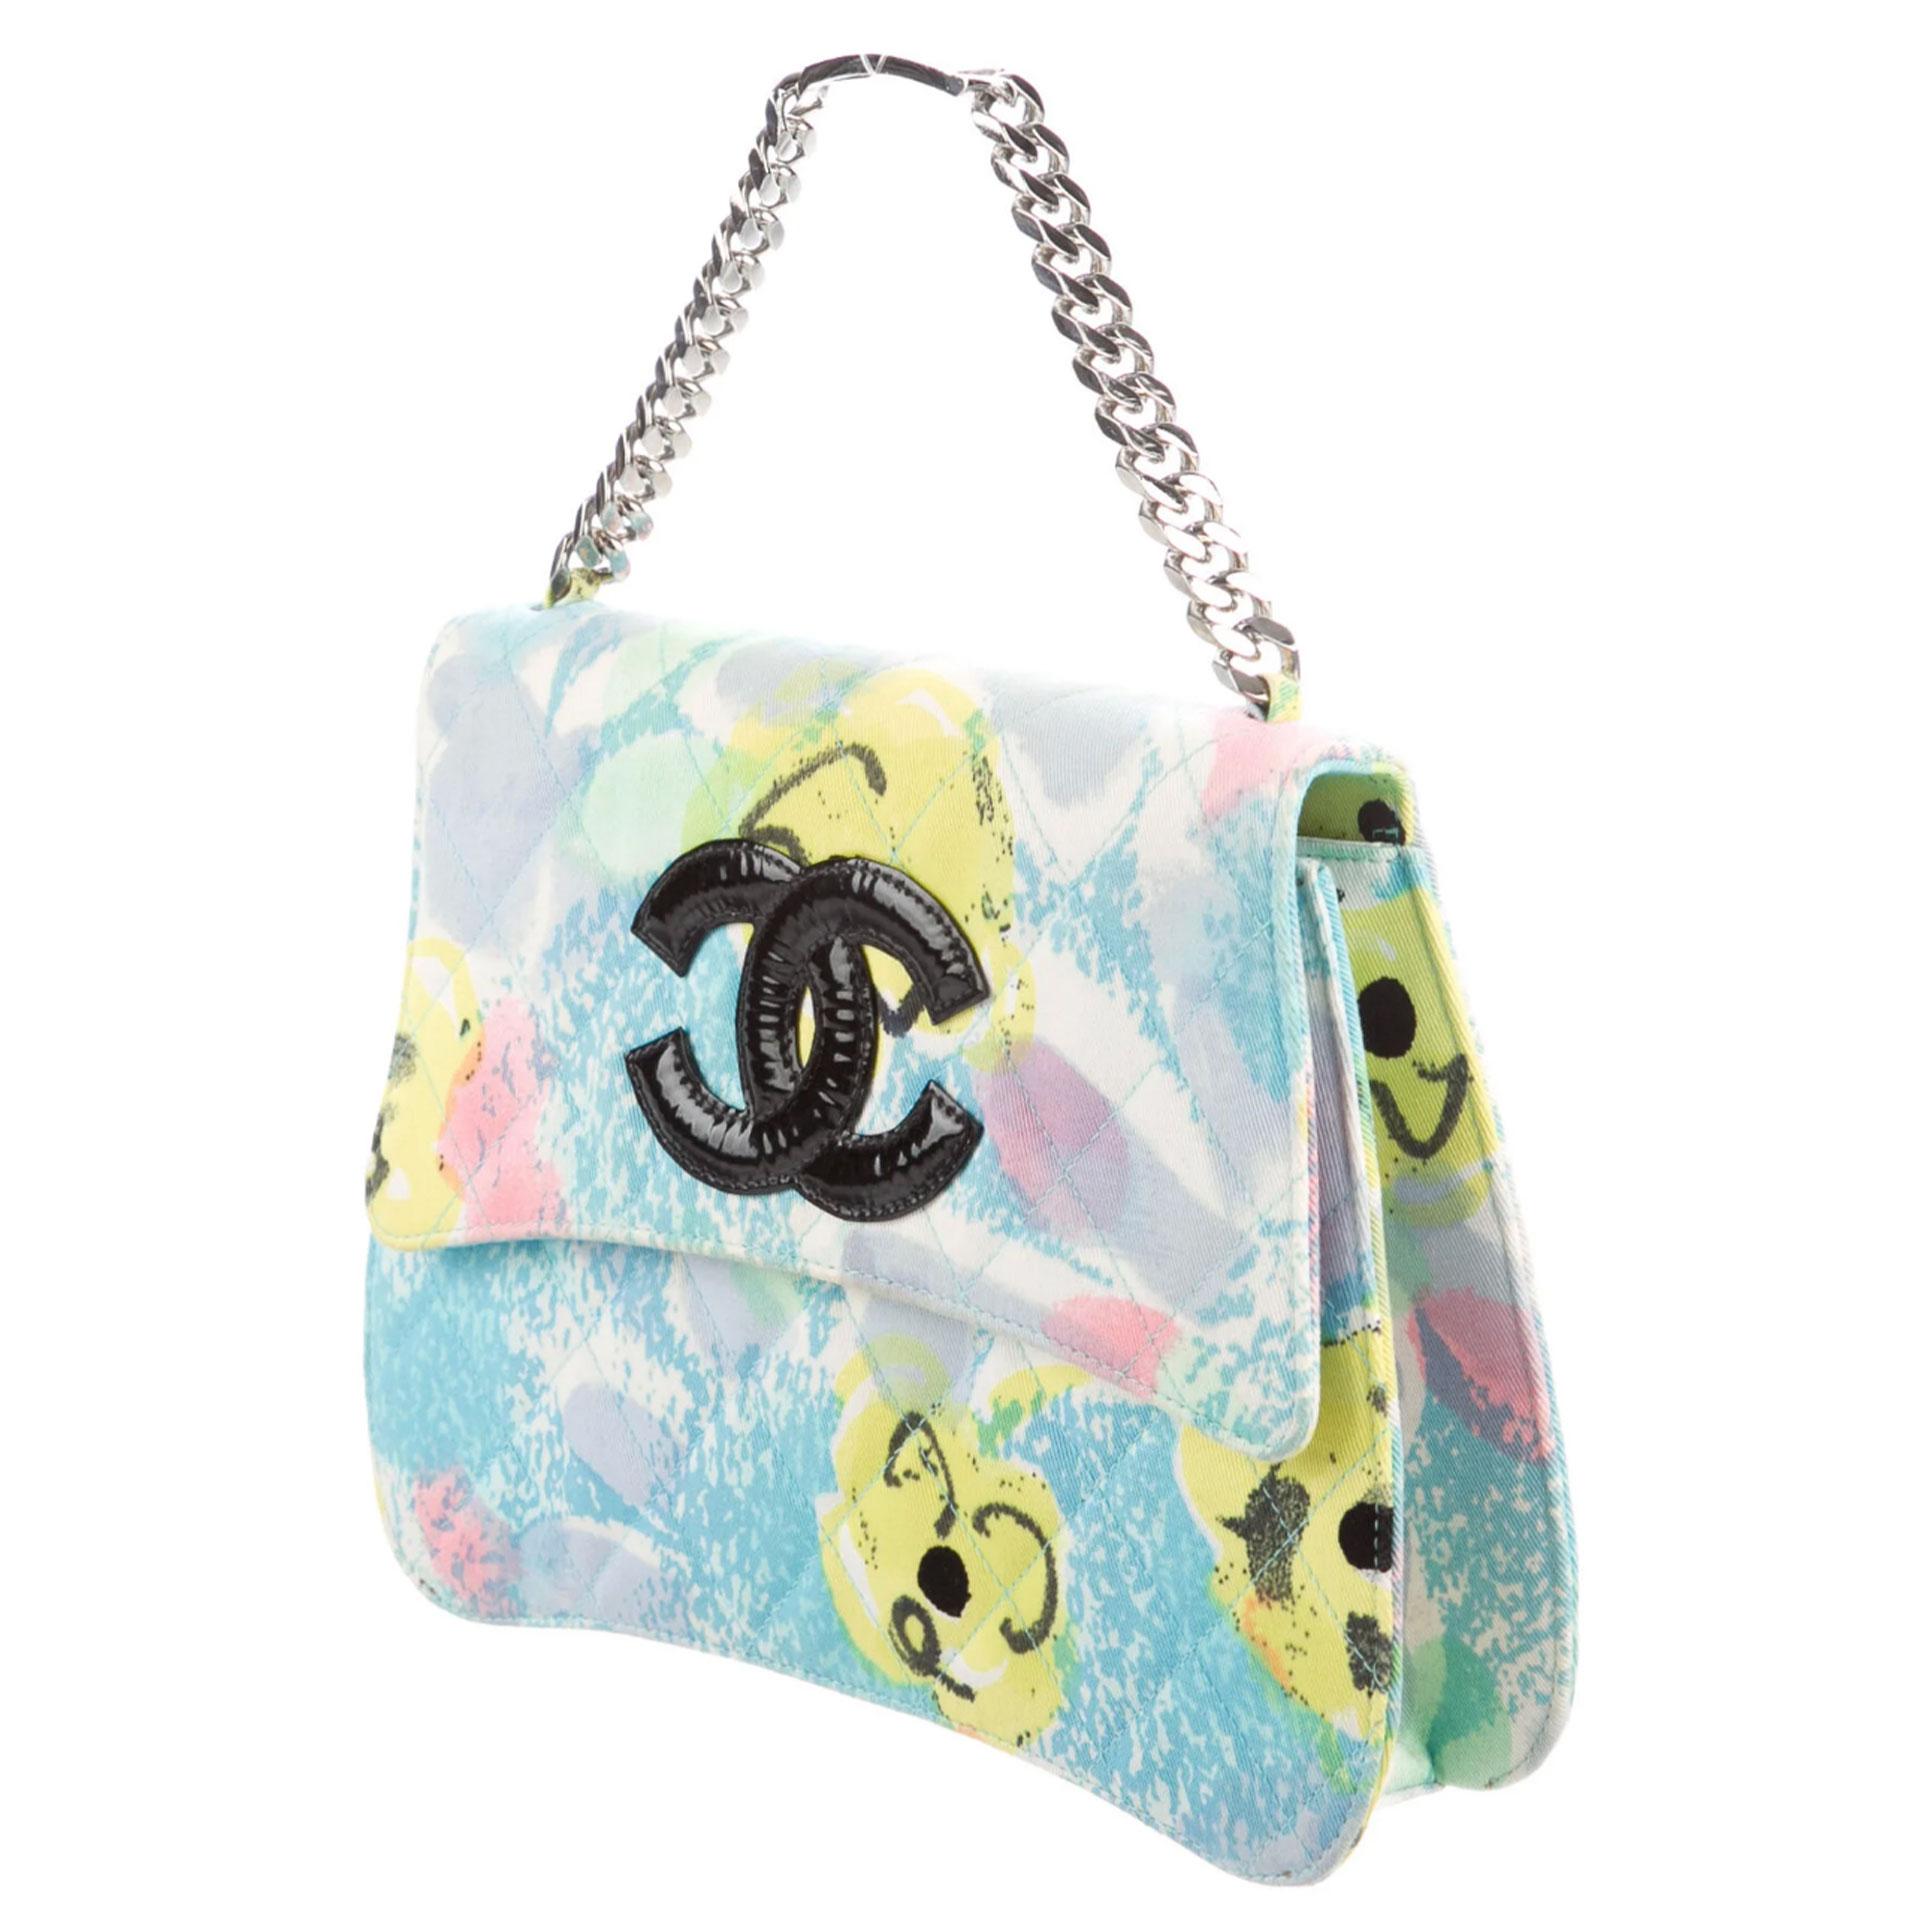 Chanel Rare Vintage 1997 Floral Turquoise Quilted Logo CC Classic Kelly Flap Bag In Good Condition For Sale In Miami, FL